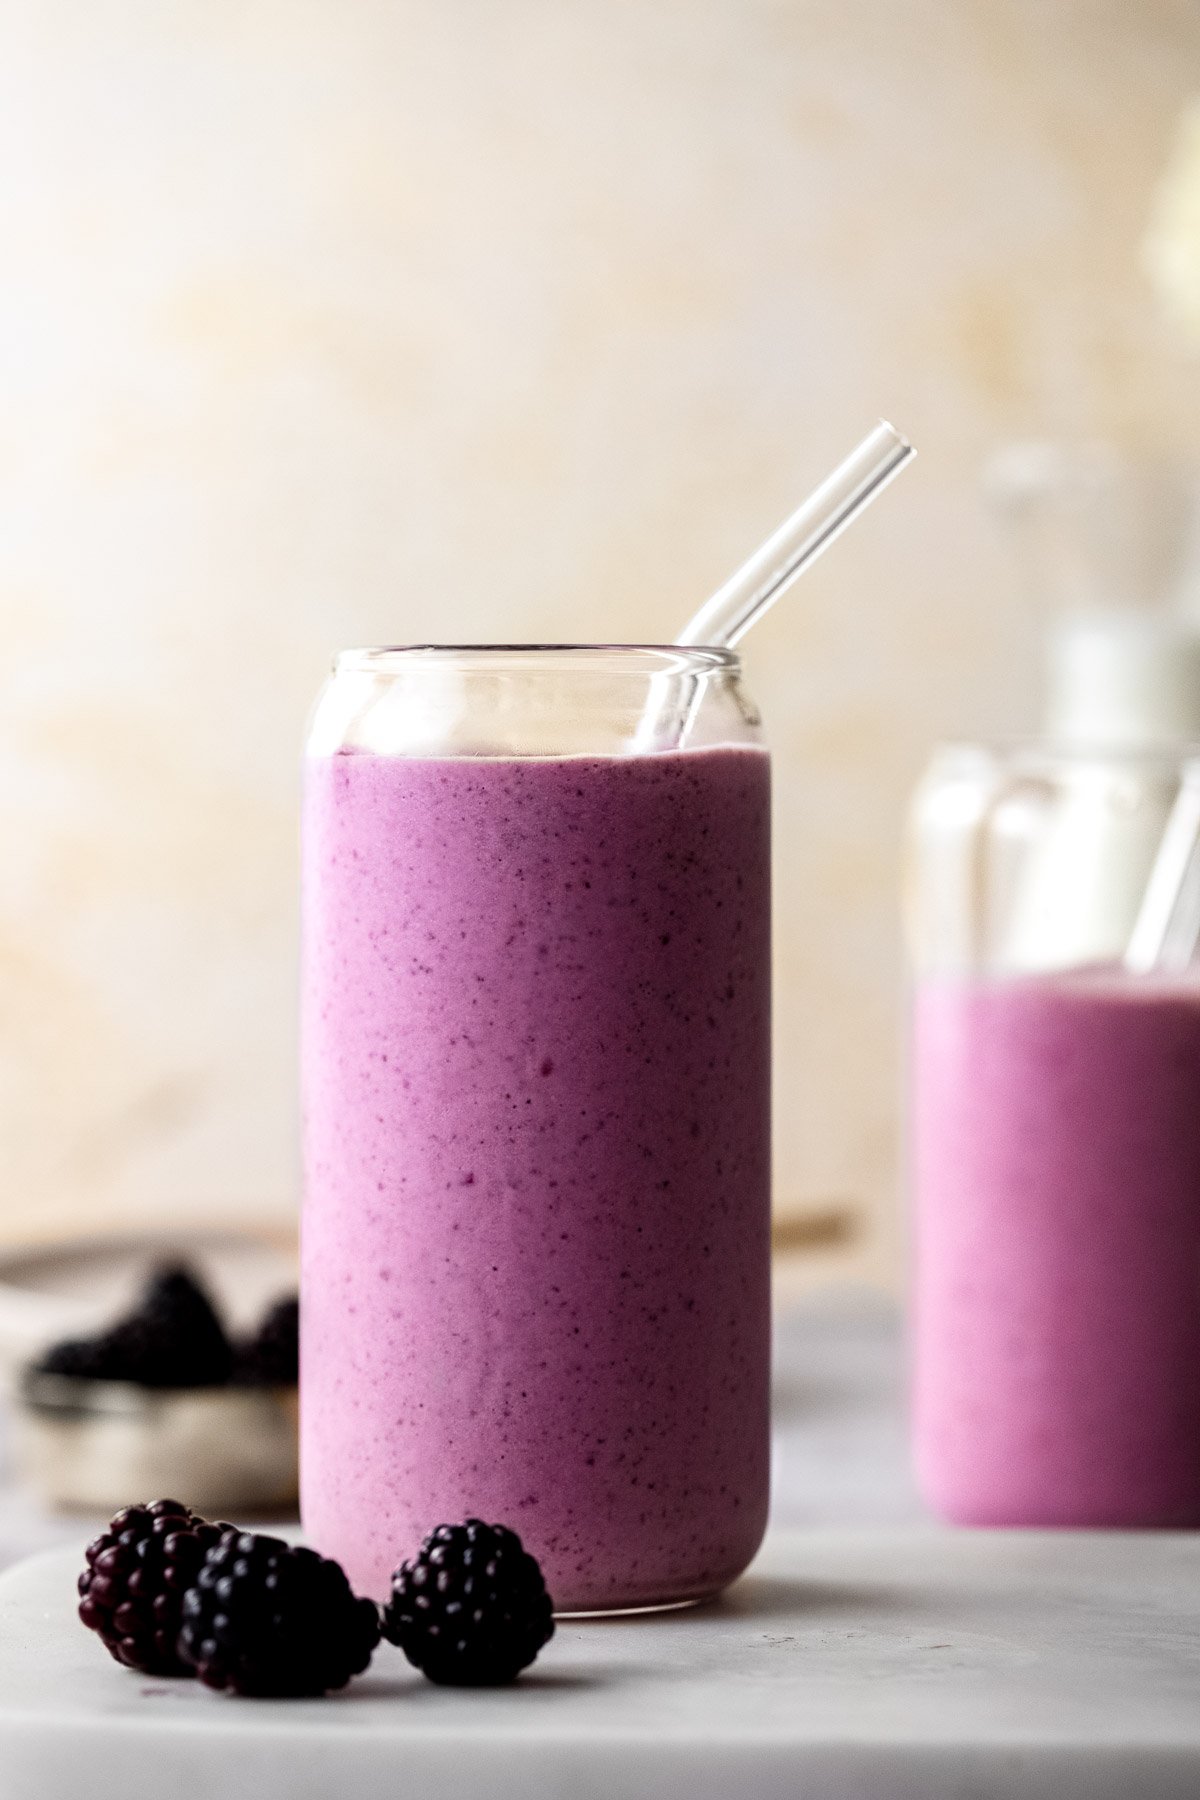 A glass filled with a purple smoothie and with a glass straw surrounded with fresh blackberries.